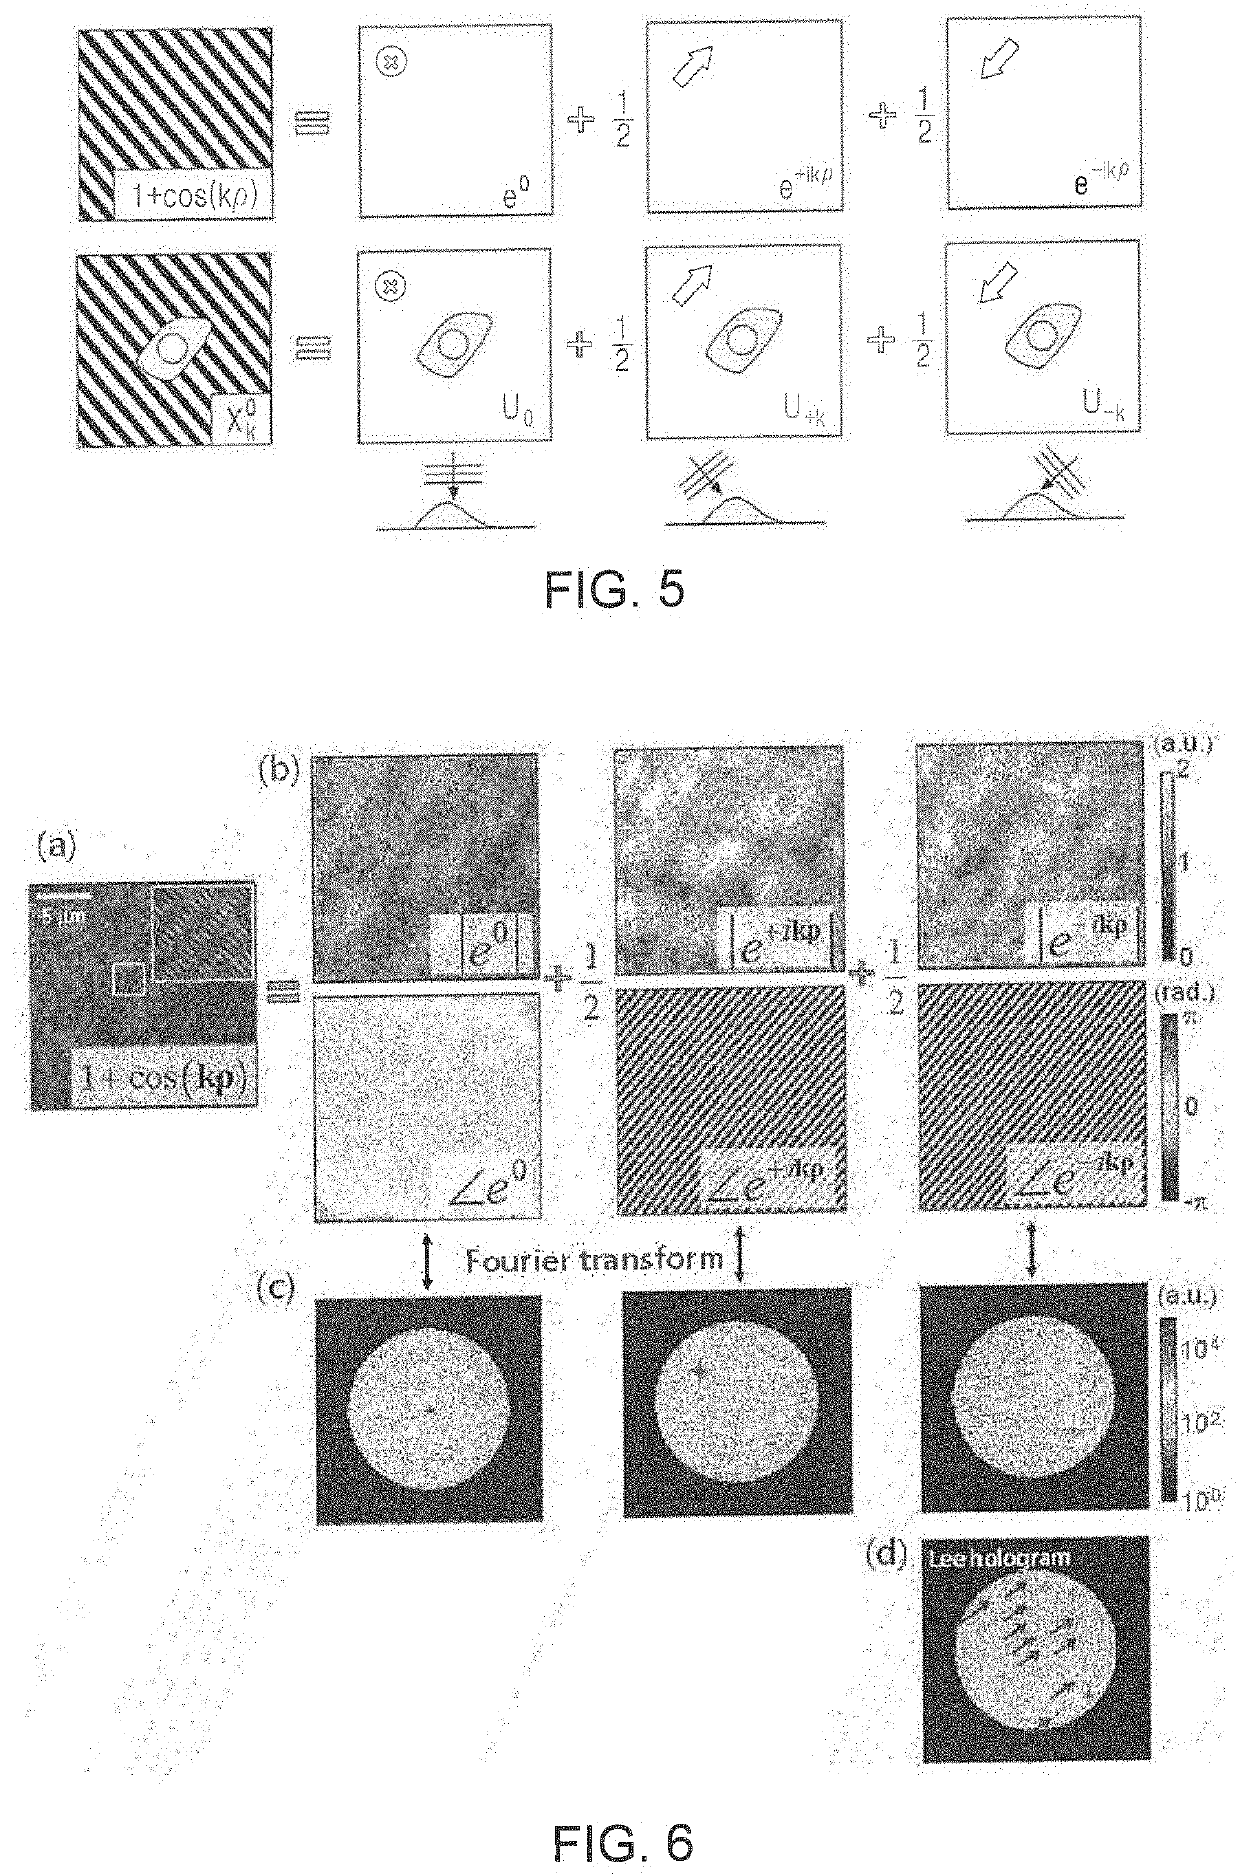 Structured illumination microscopy system using digital micromirror device and time-complex structured illumination, and operation method therefor